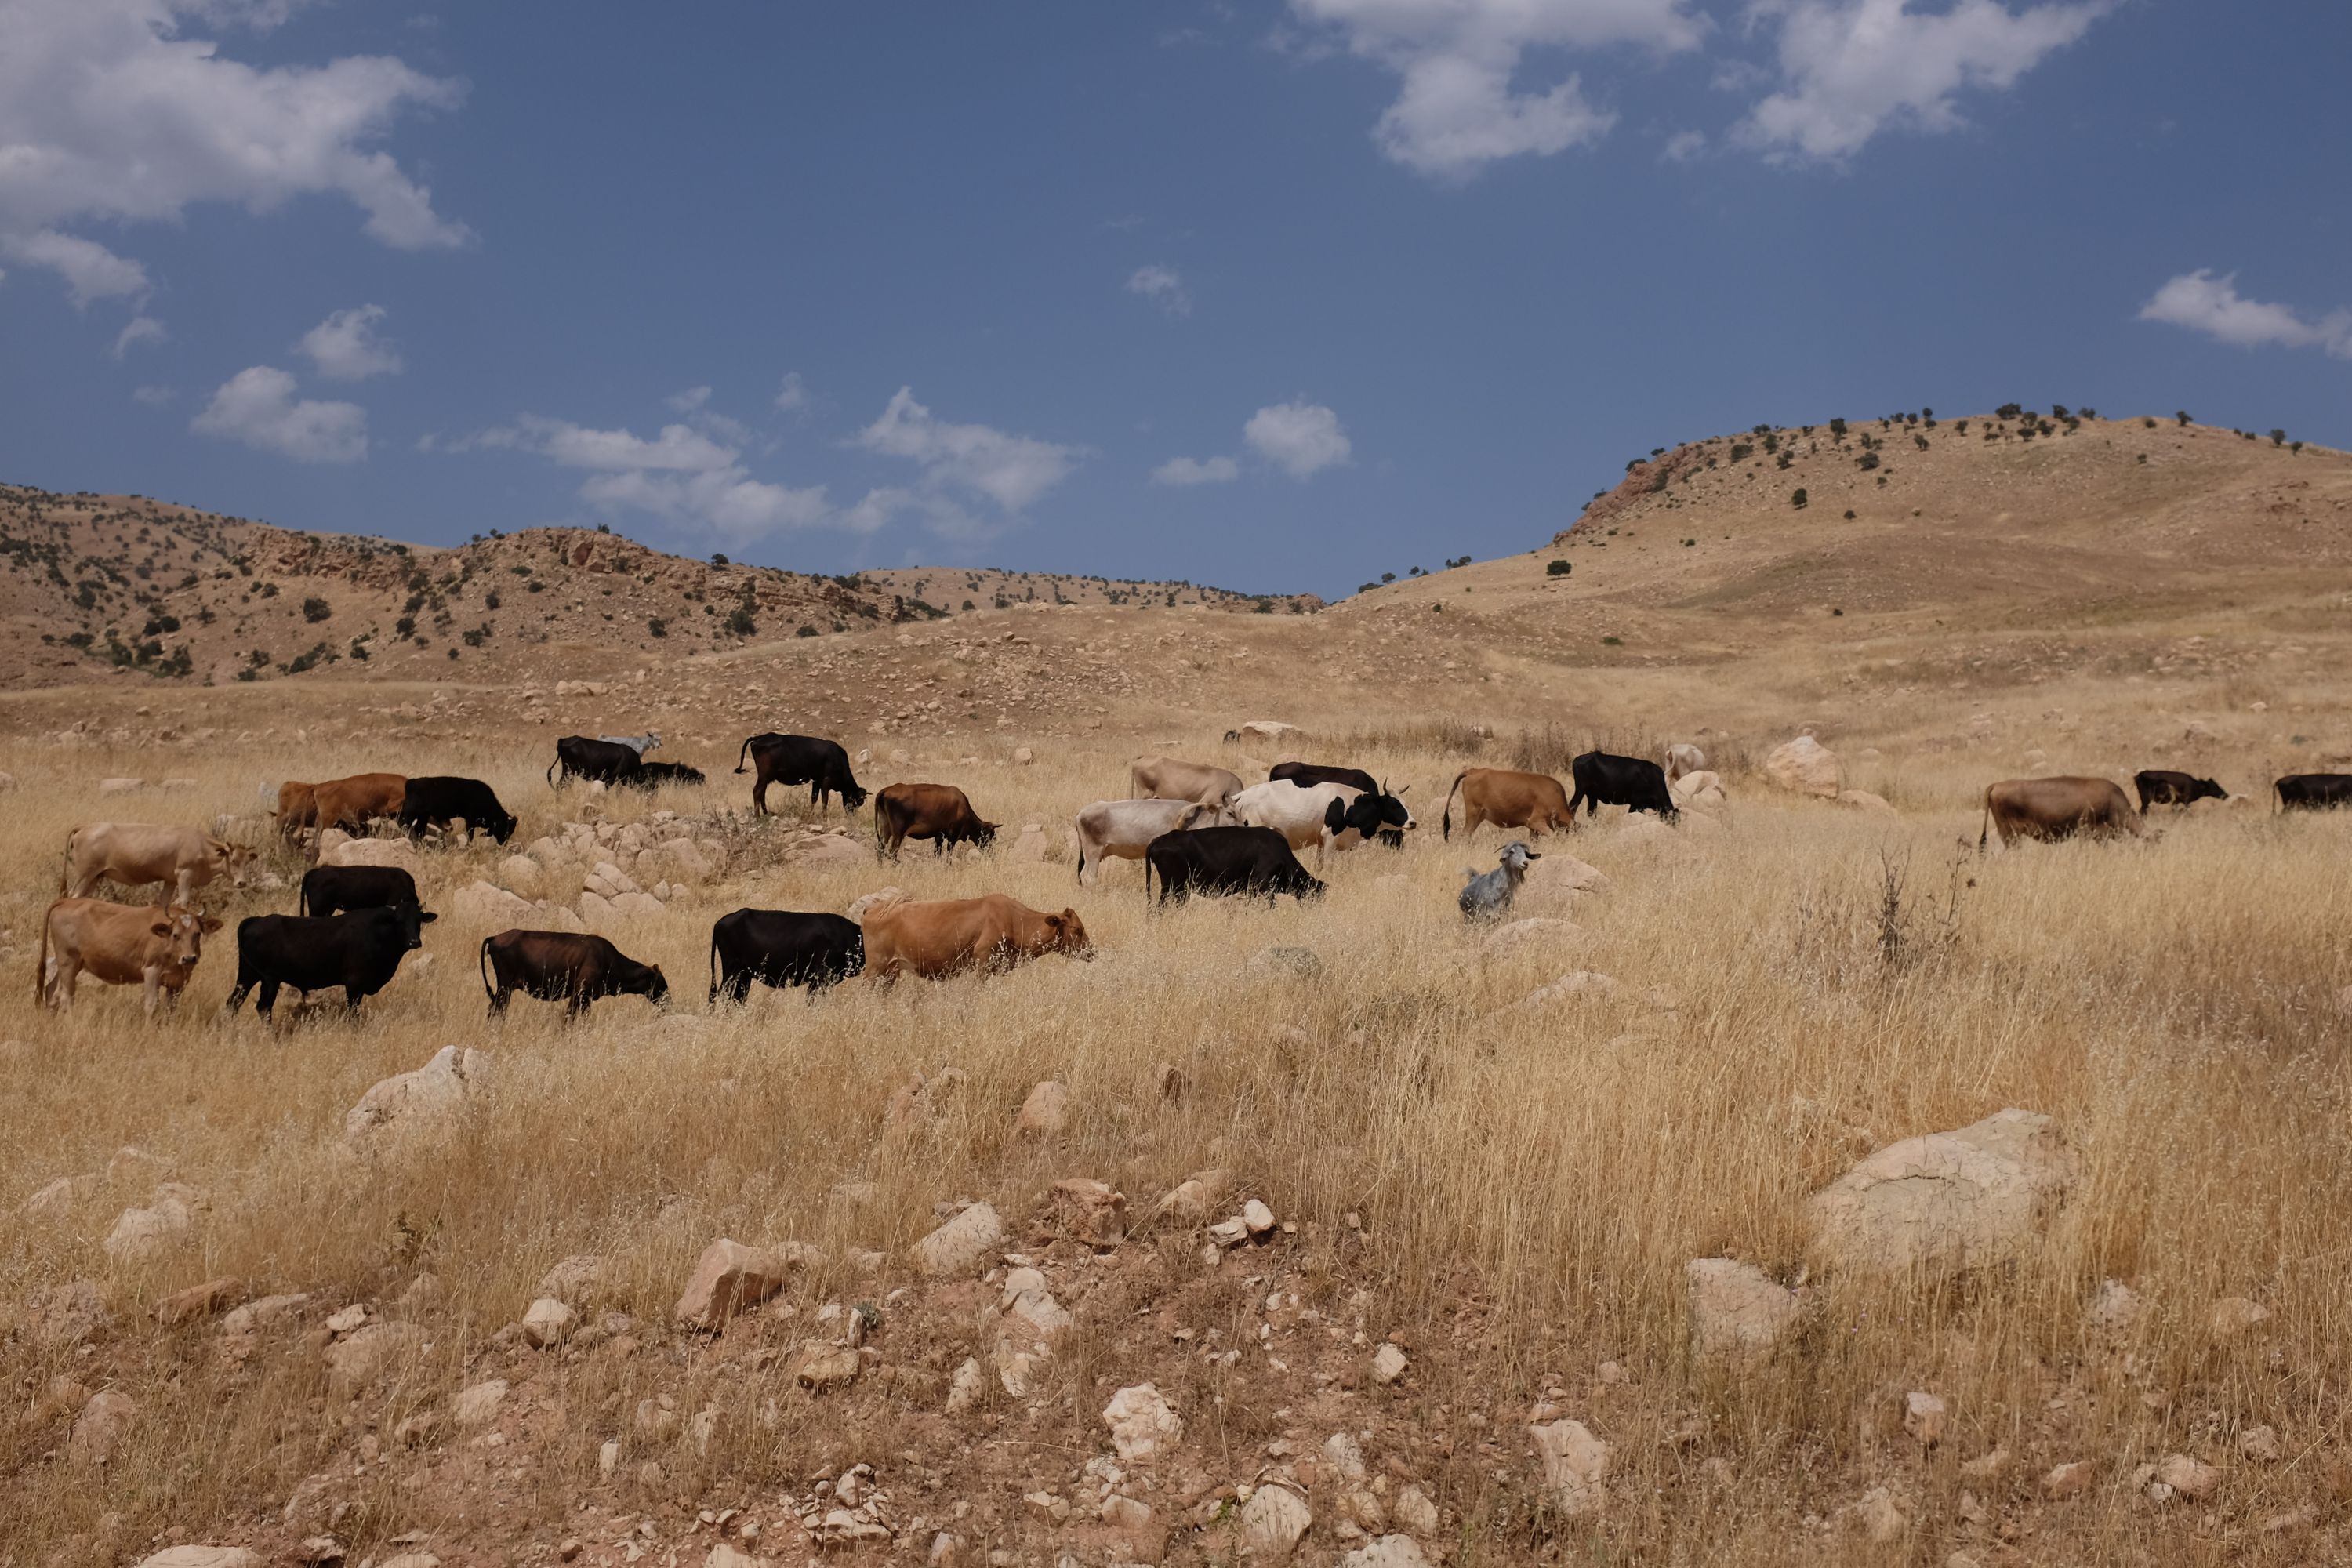 A number of cows and two grey goats graze on a hillside burned yellow by the sun.